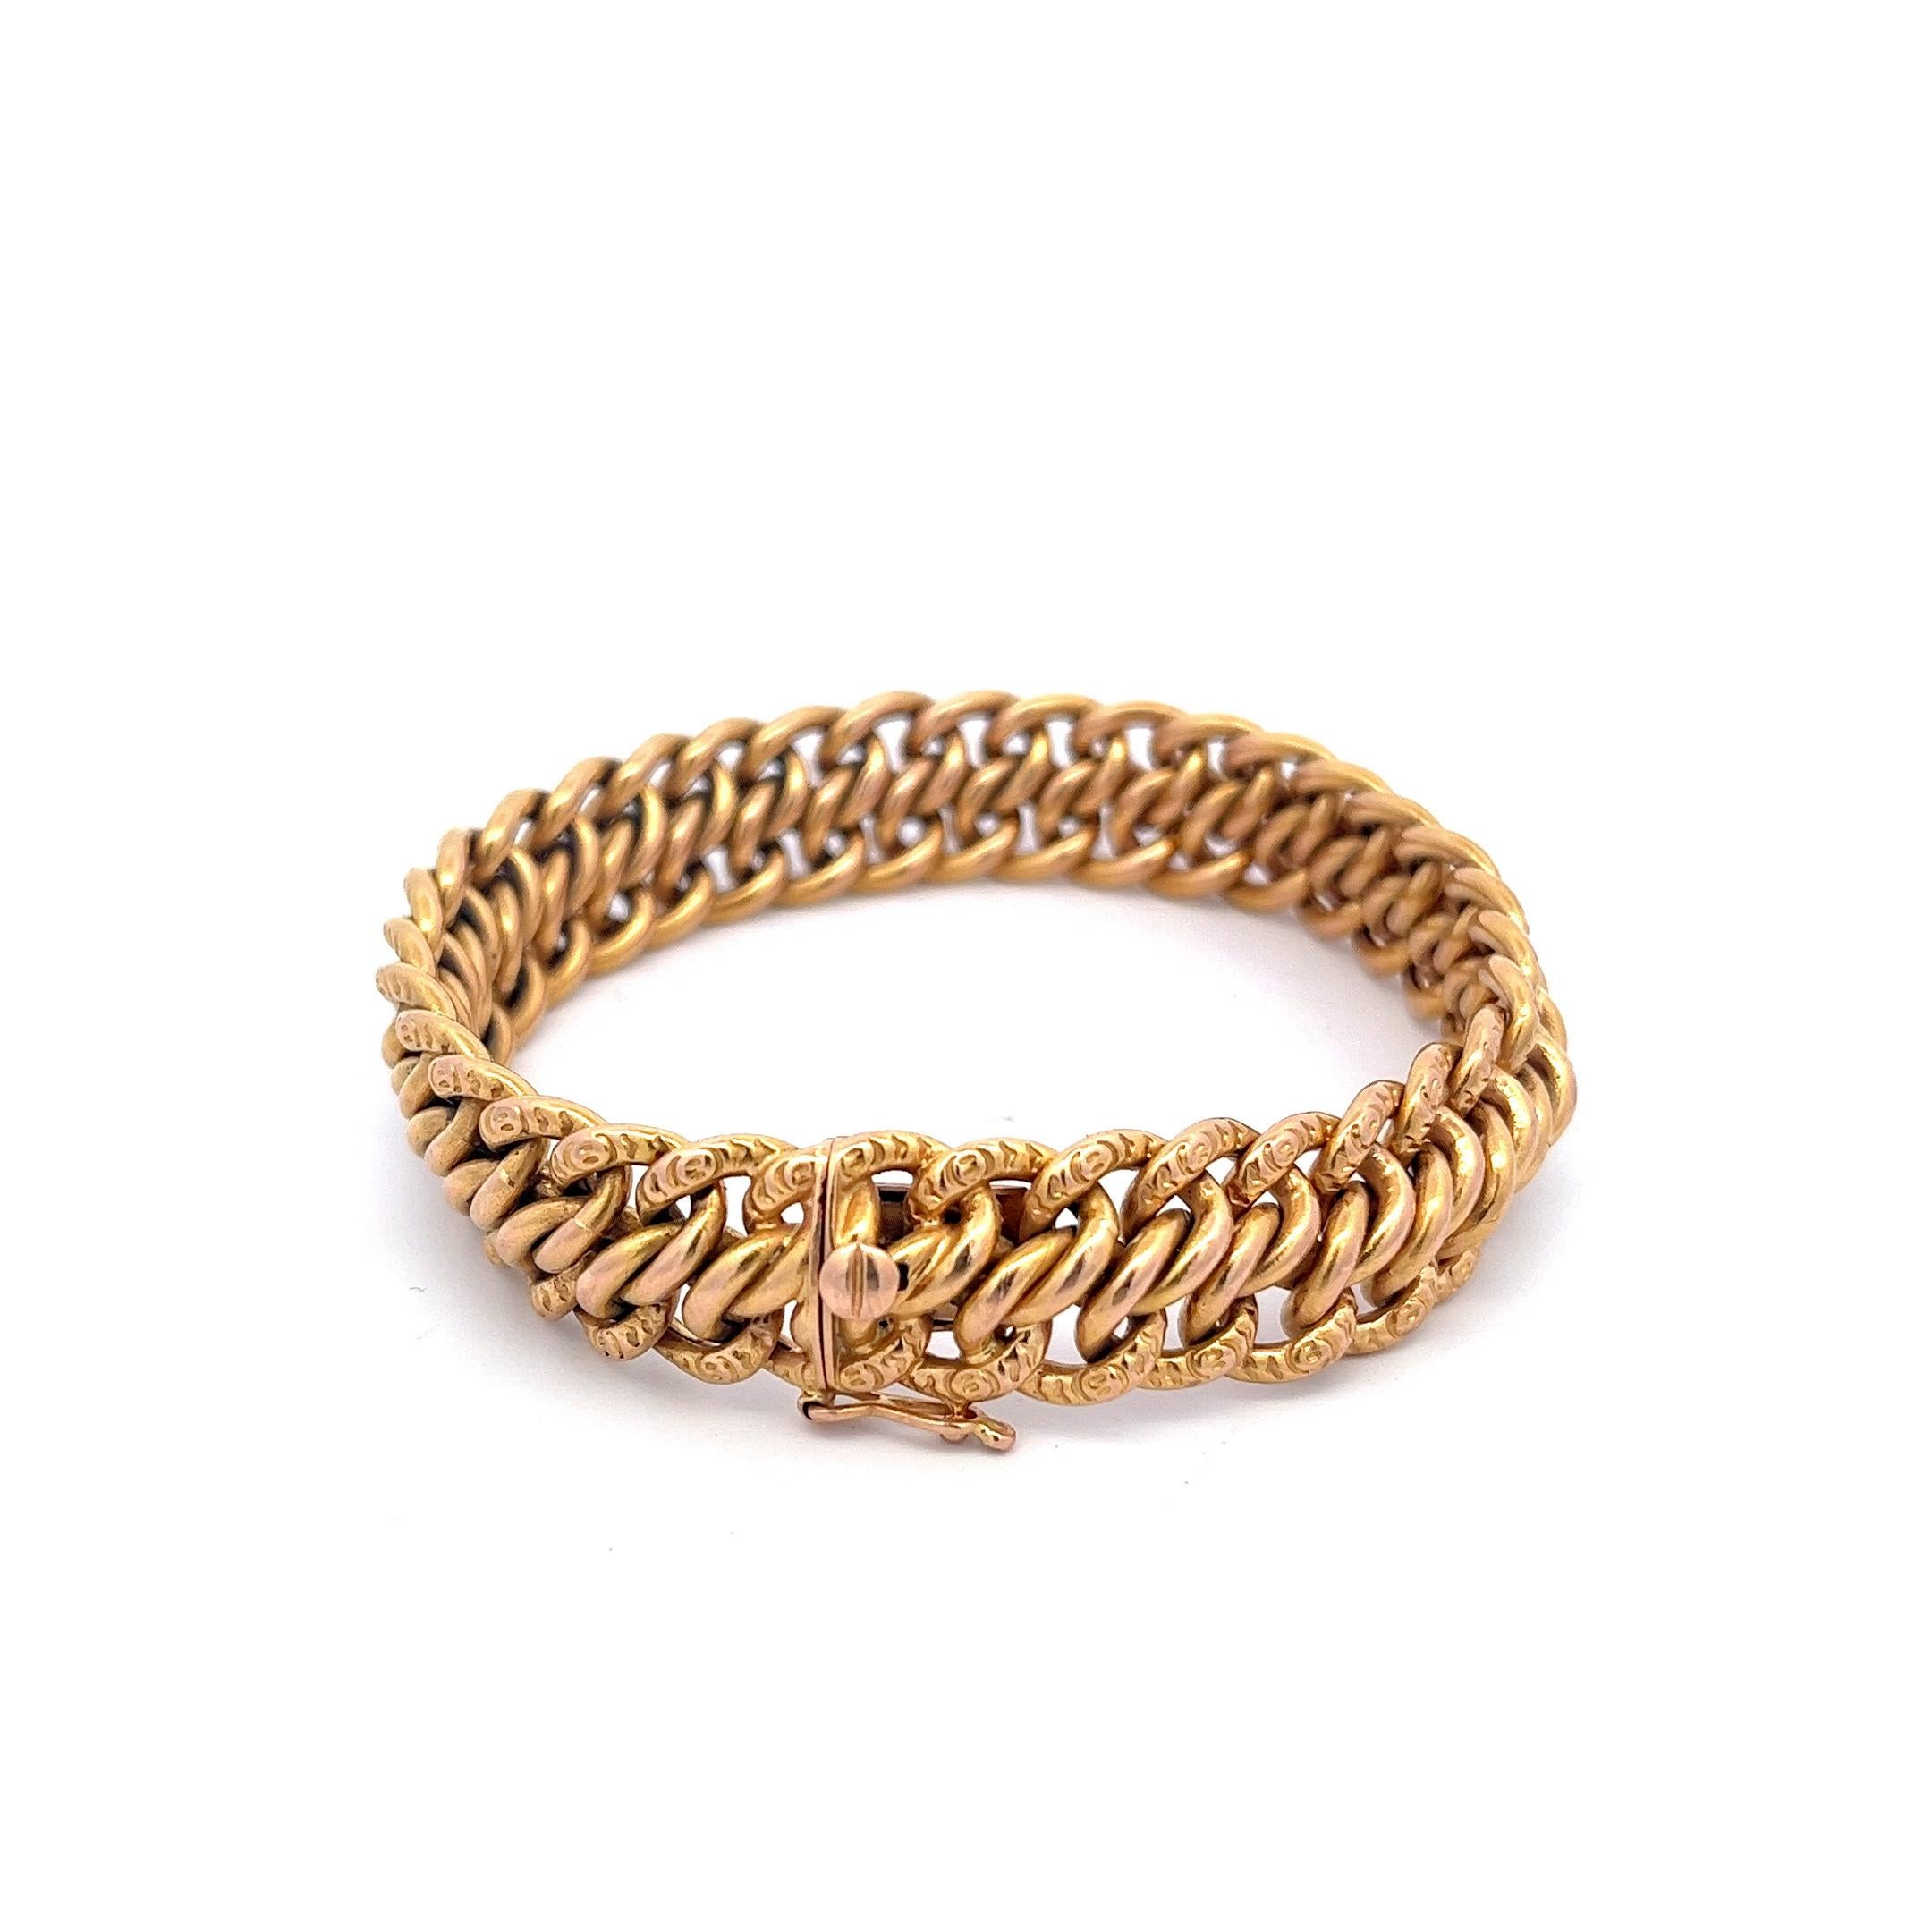 This exquisite bracelet showcases the artistry and craftsmanship of French jewelry-making. Designed with a timeless curb link motif, this bracelet features approximately 68 interlocking links, cleverly arranged to create the illusion of three rows